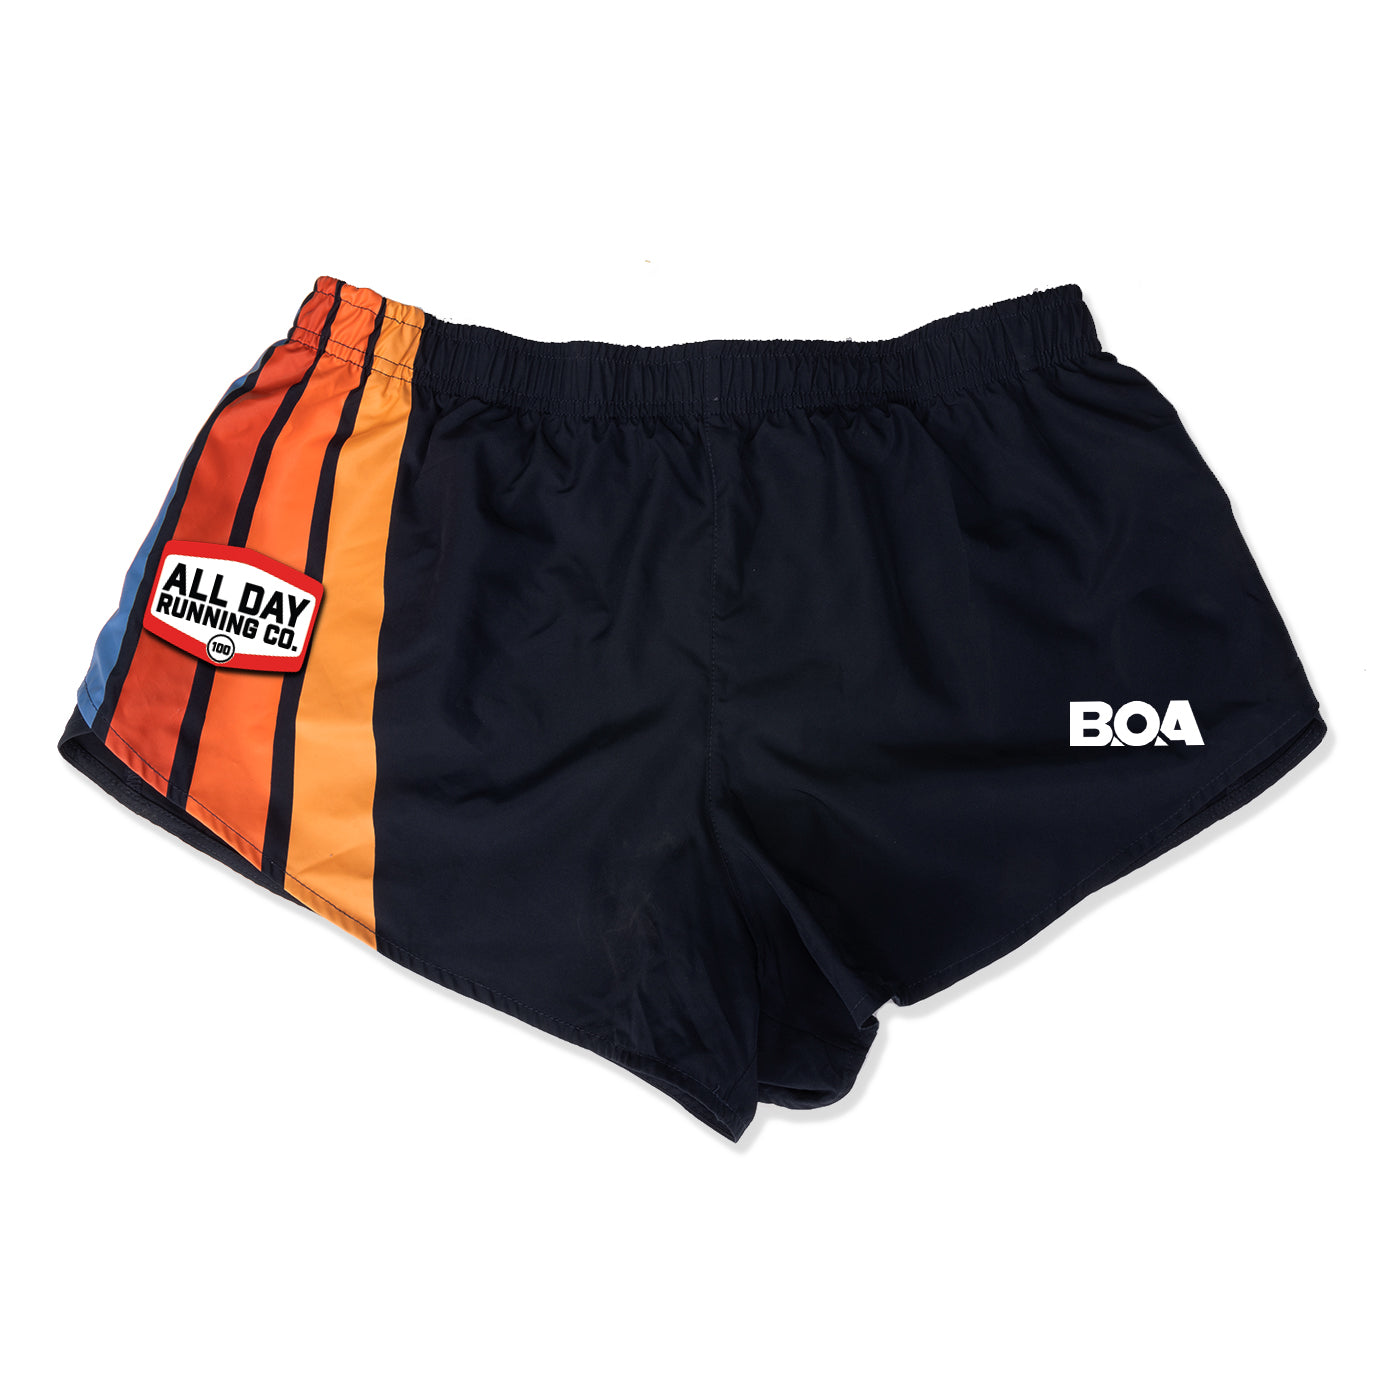 All Day x BOA Collab -  Women's Shorts - Track Stripes